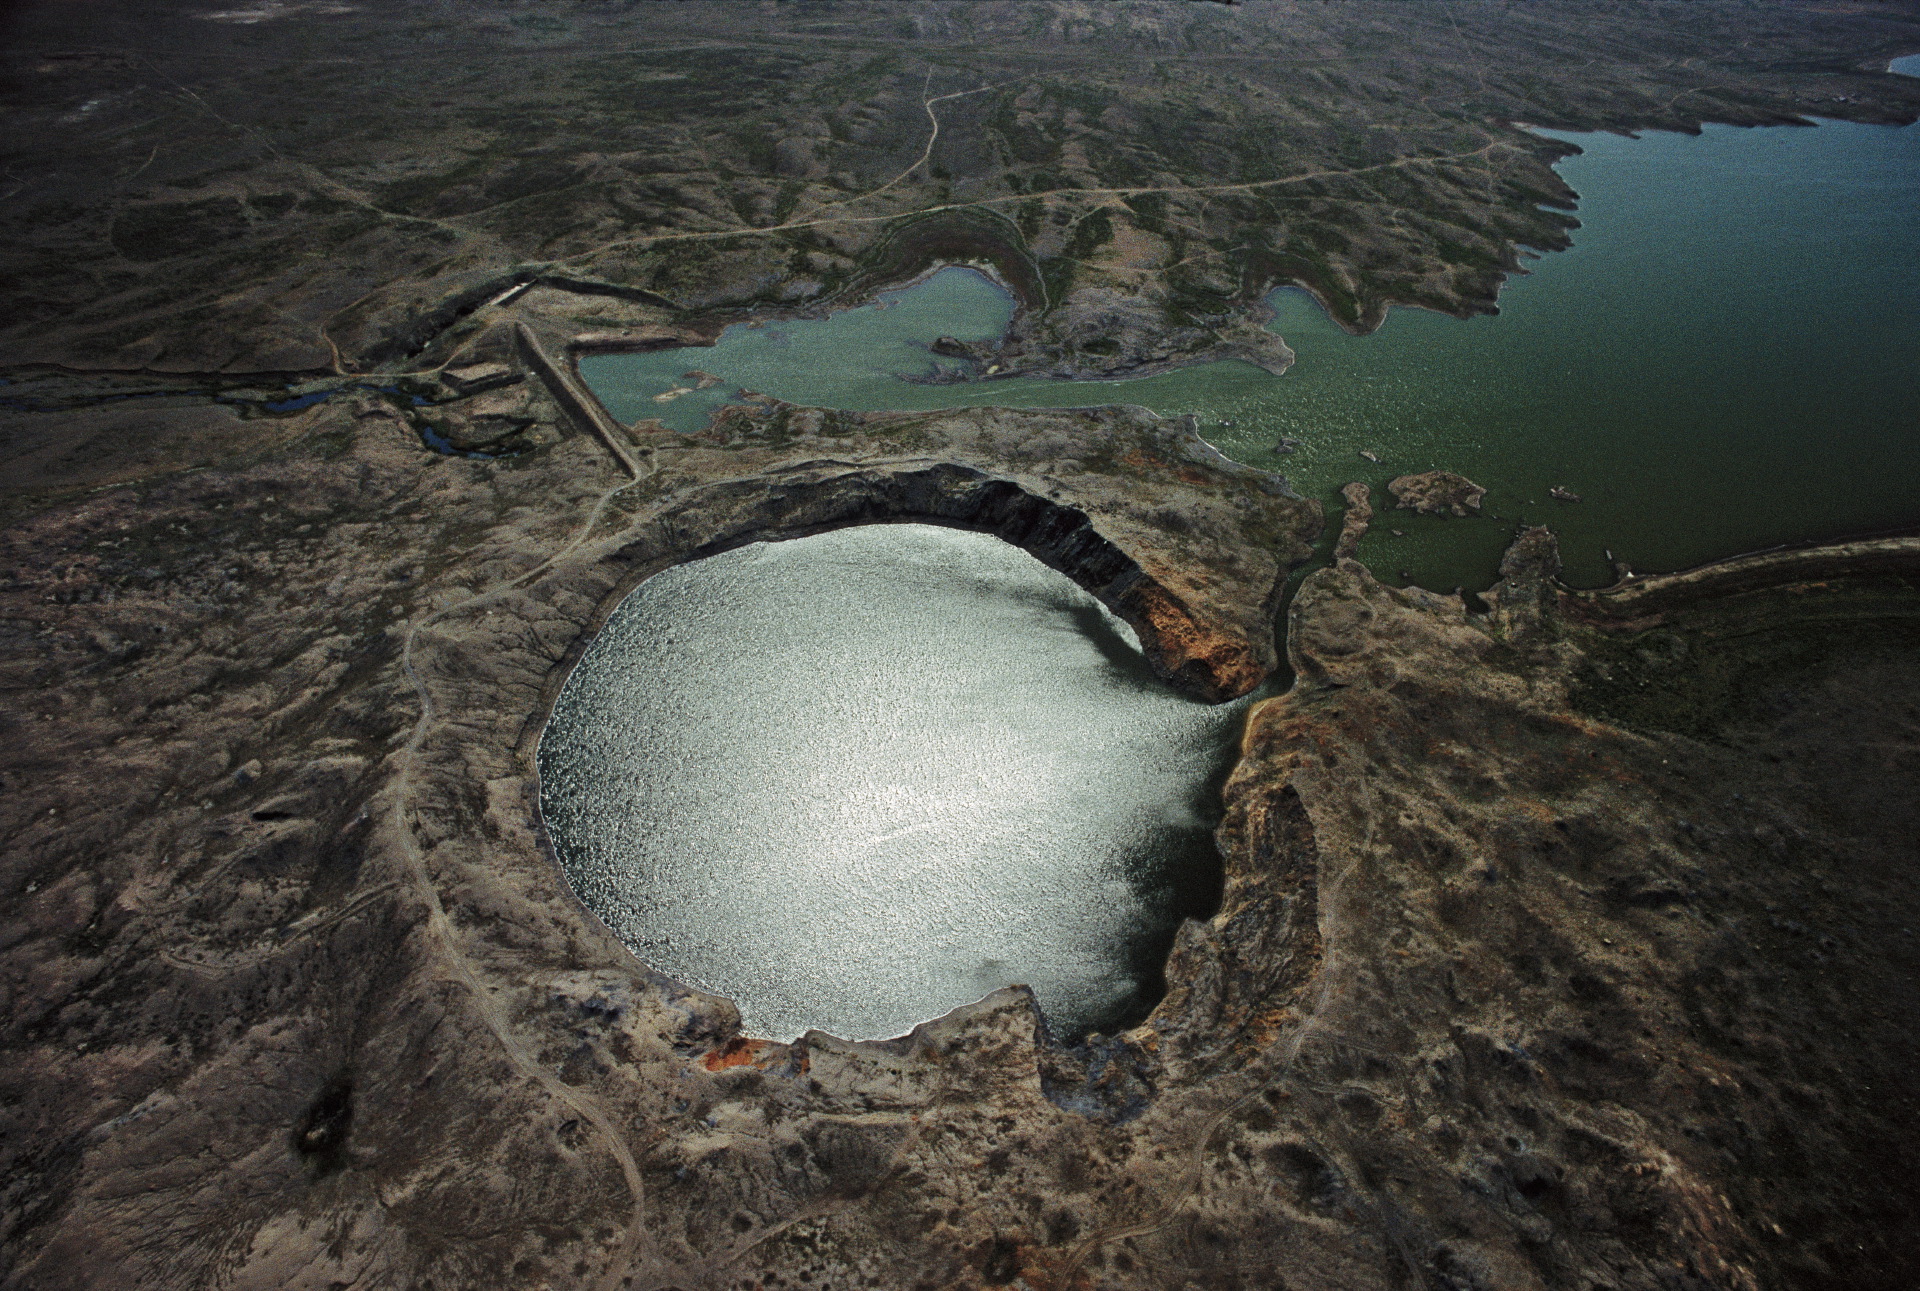  The largest and most notable "cratering shot" detonation following the Partial Nuclear Test Ban Treaty took place in 1965 at the Chagan nuclear test site in Kazakhstan. Large amounts of radiation were vented when this reservoir (also known as "Atomi